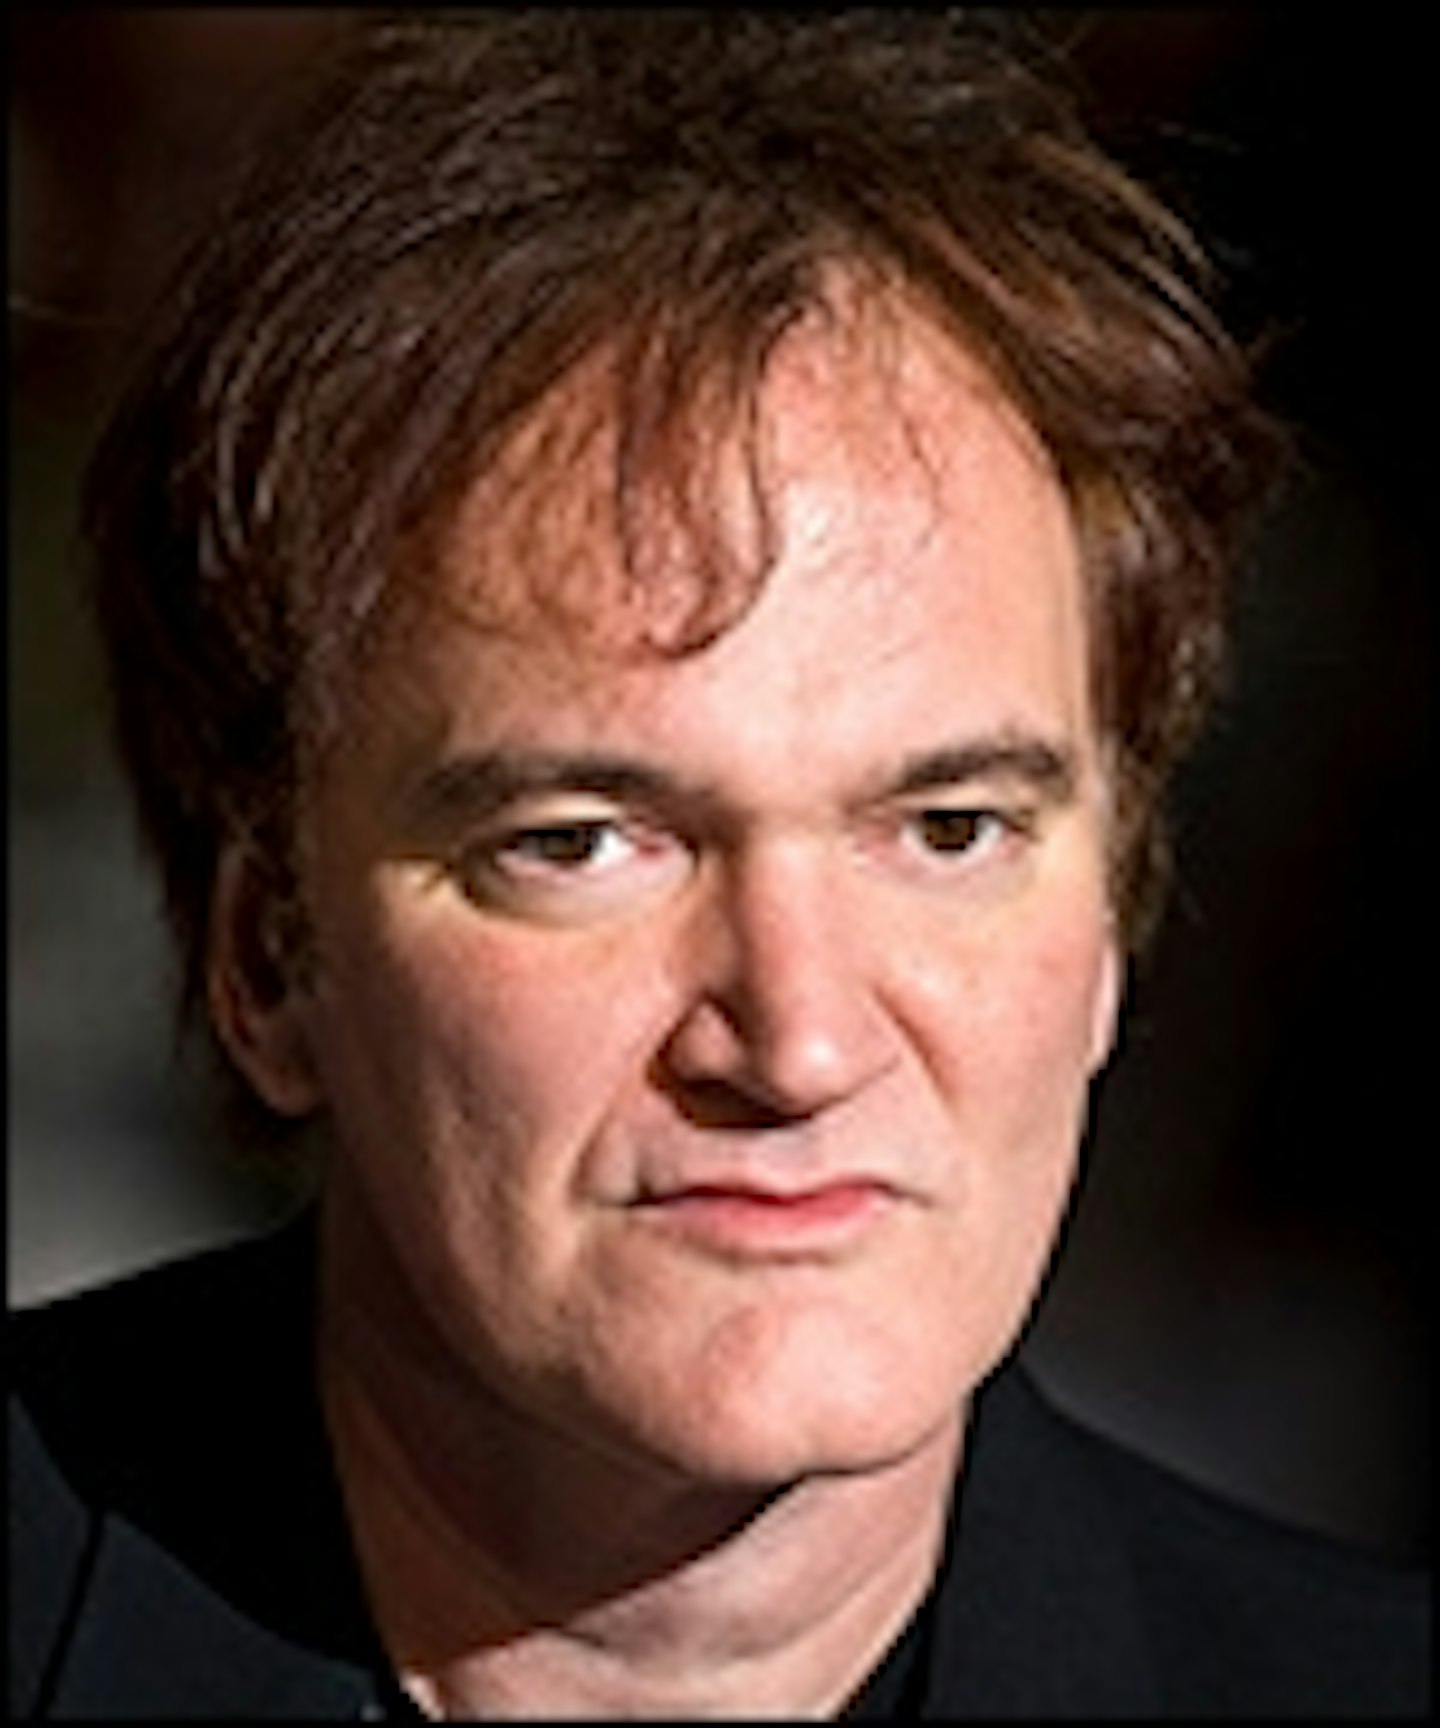 Quentin Tarantino Claims He'll Retire After His Tenth Film